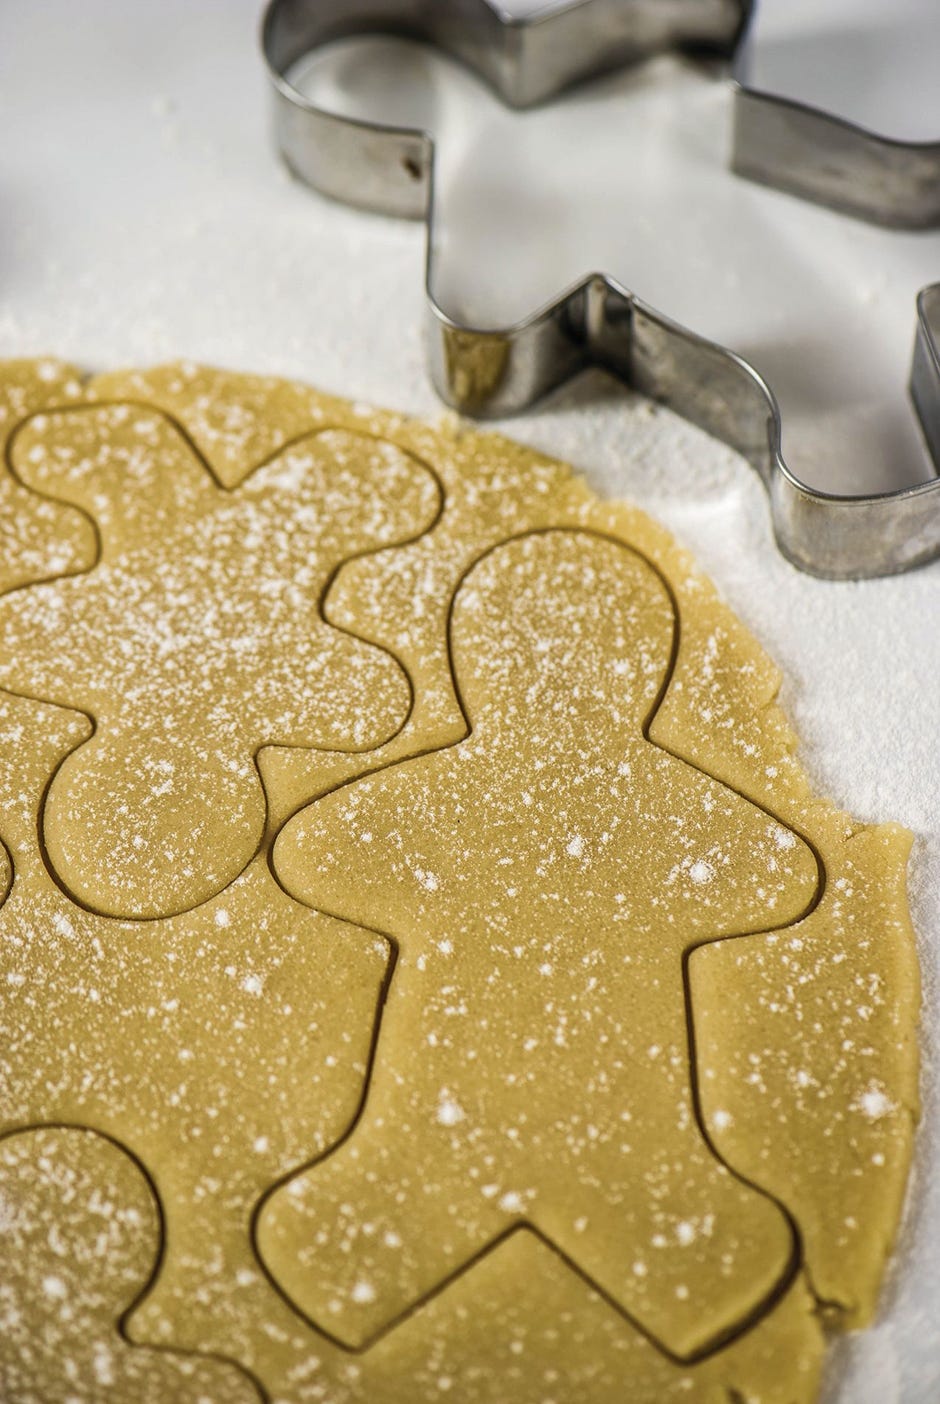 Gingerbread in all its forms has been enjoyed over 200 years. [SPECIAL TO THE NEWS BULLETIN]